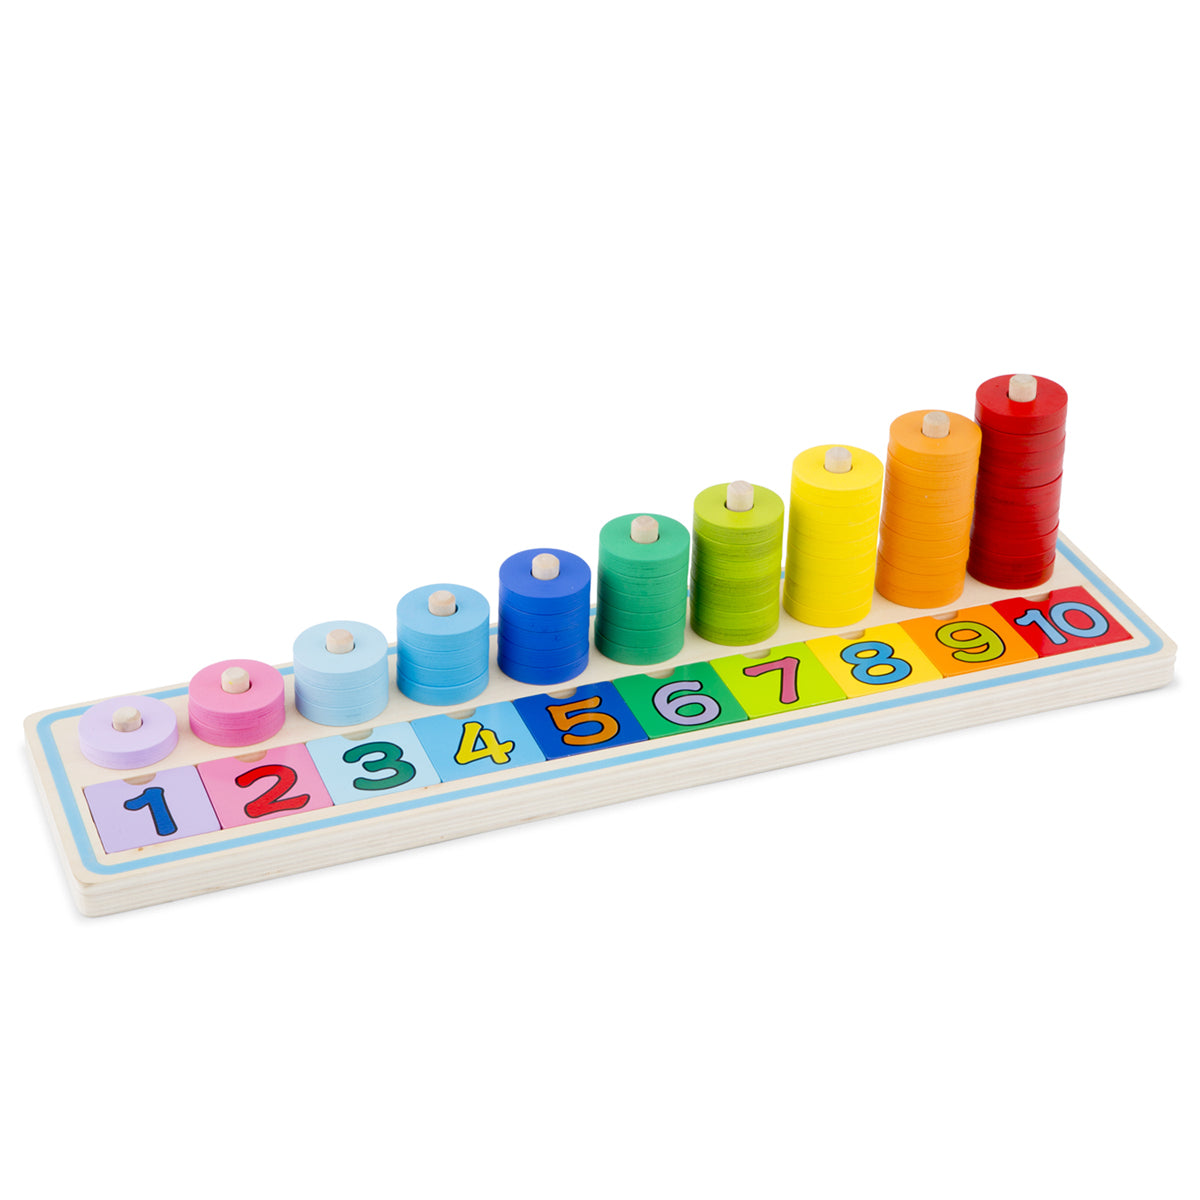 New Classic Toys Learn To Count Educational Wooden Toy